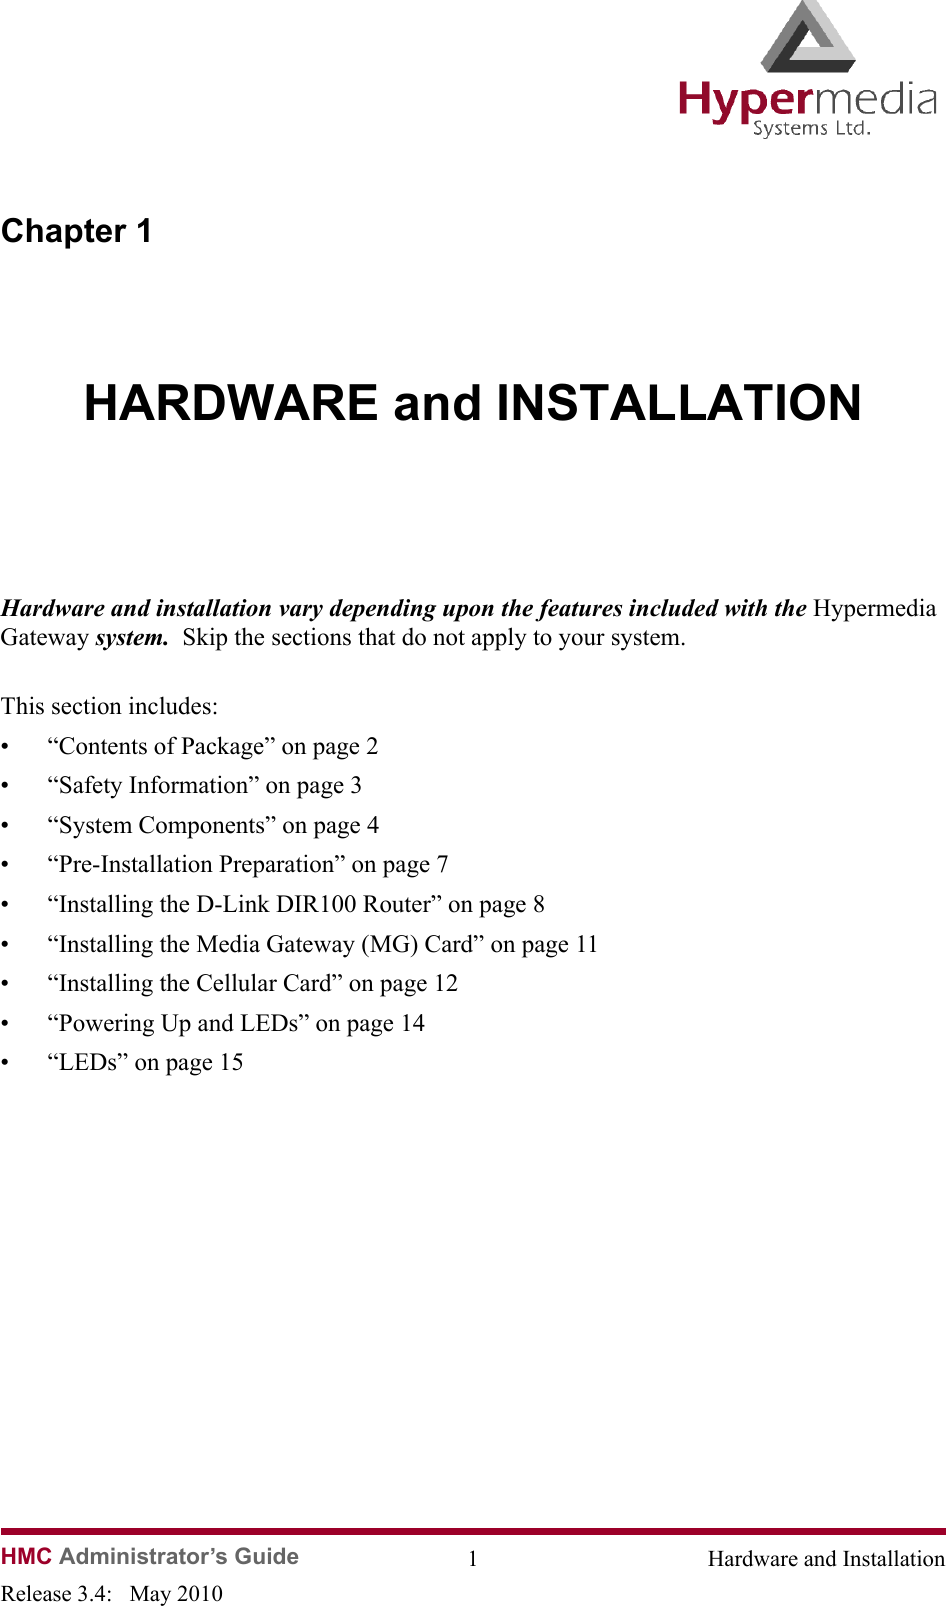 HMC Administrator’s Guide 1 Hardware and InstallationRelease 3.4:   May 2010Chapter 1HARDWARE and INSTALLATIONHardware and installation vary depending upon the features included with the Hypermedia Gateway system.  Skip the sections that do not apply to your system.This section includes:• “Contents of Package” on page 2• “Safety Information” on page 3• “System Components” on page 4• “Pre-Installation Preparation” on page 7• “Installing the D-Link DIR100 Router” on page 8• “Installing the Media Gateway (MG) Card” on page 11• “Installing the Cellular Card” on page 12• “Powering Up and LEDs” on page 14• “LEDs” on page 15